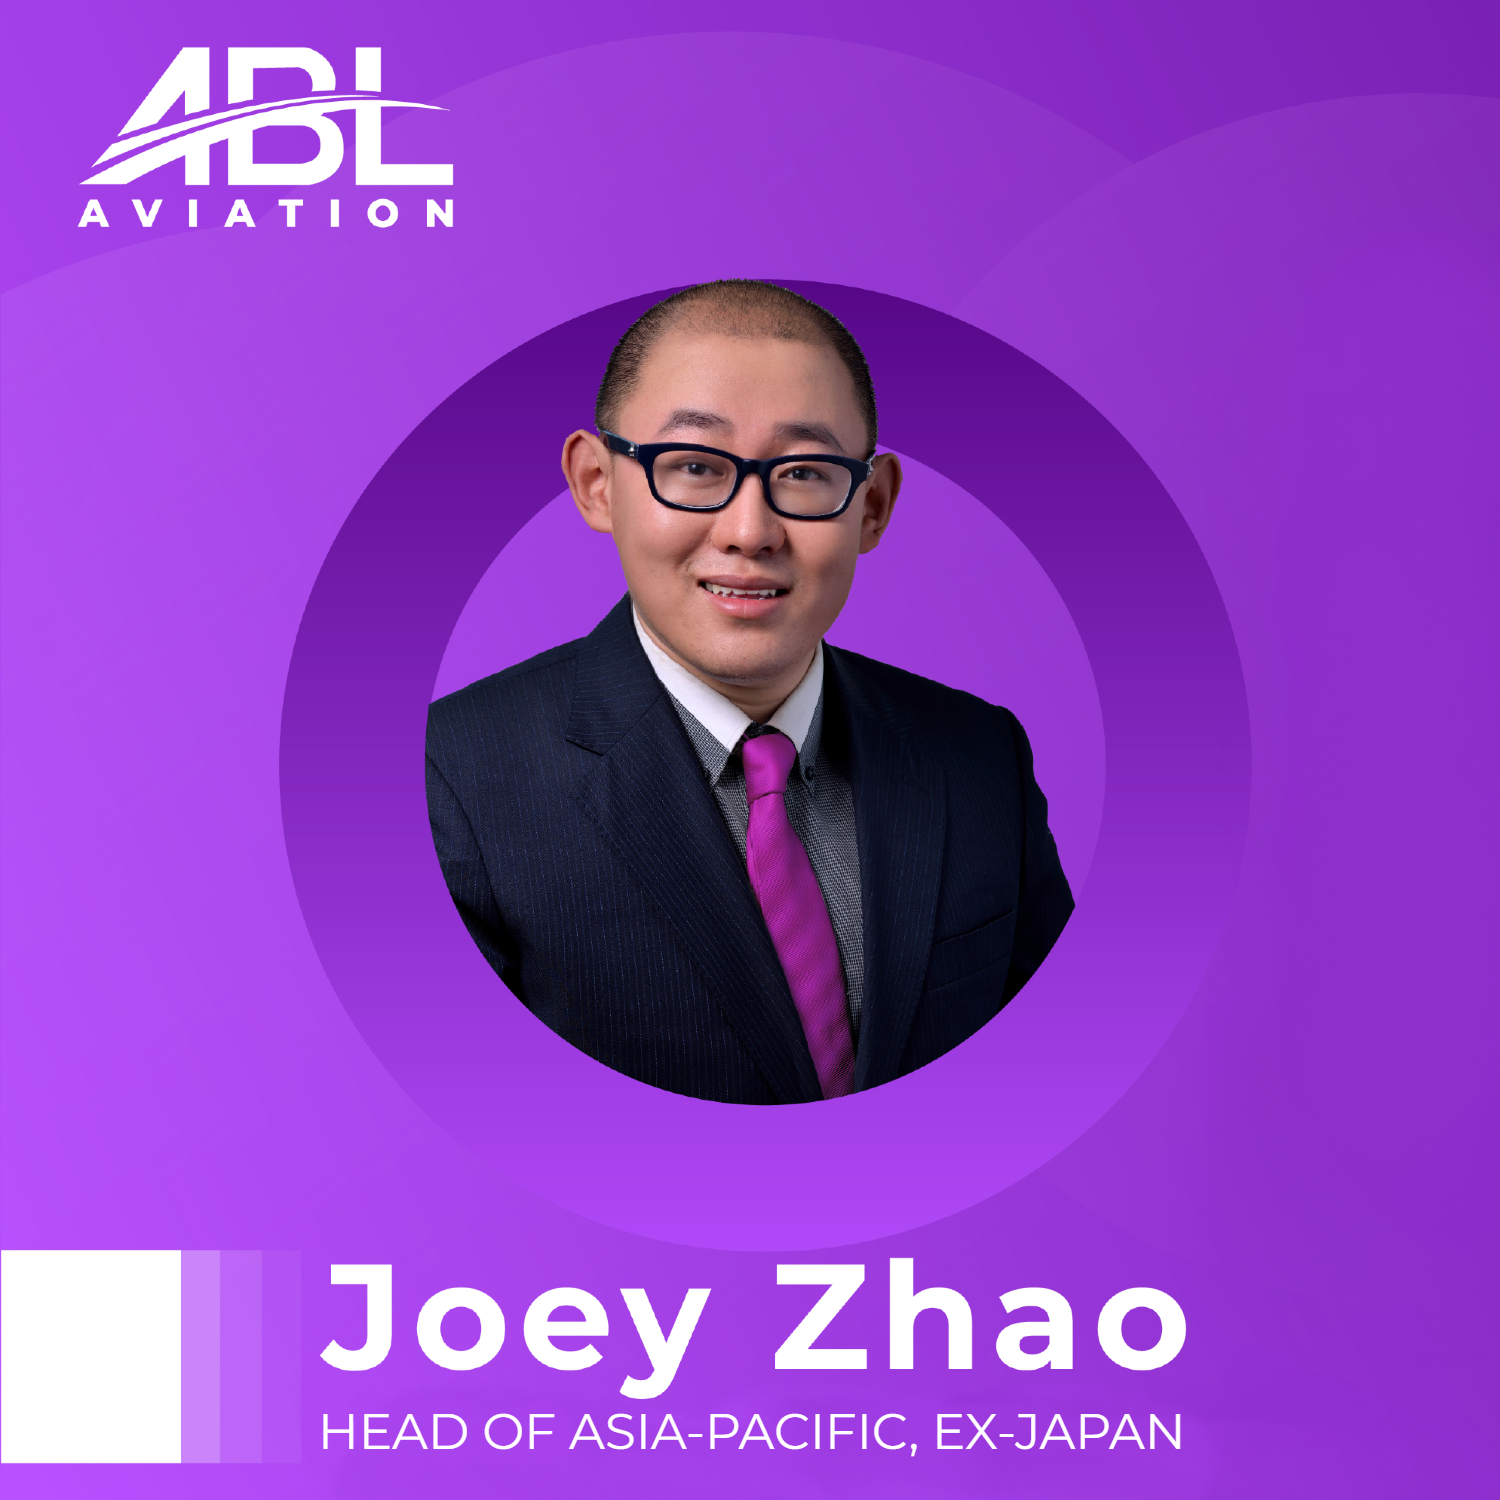 Joey Zhao Has Been Appointed As Head Of Asia-Pacific, Ex- Japan In ABL ...